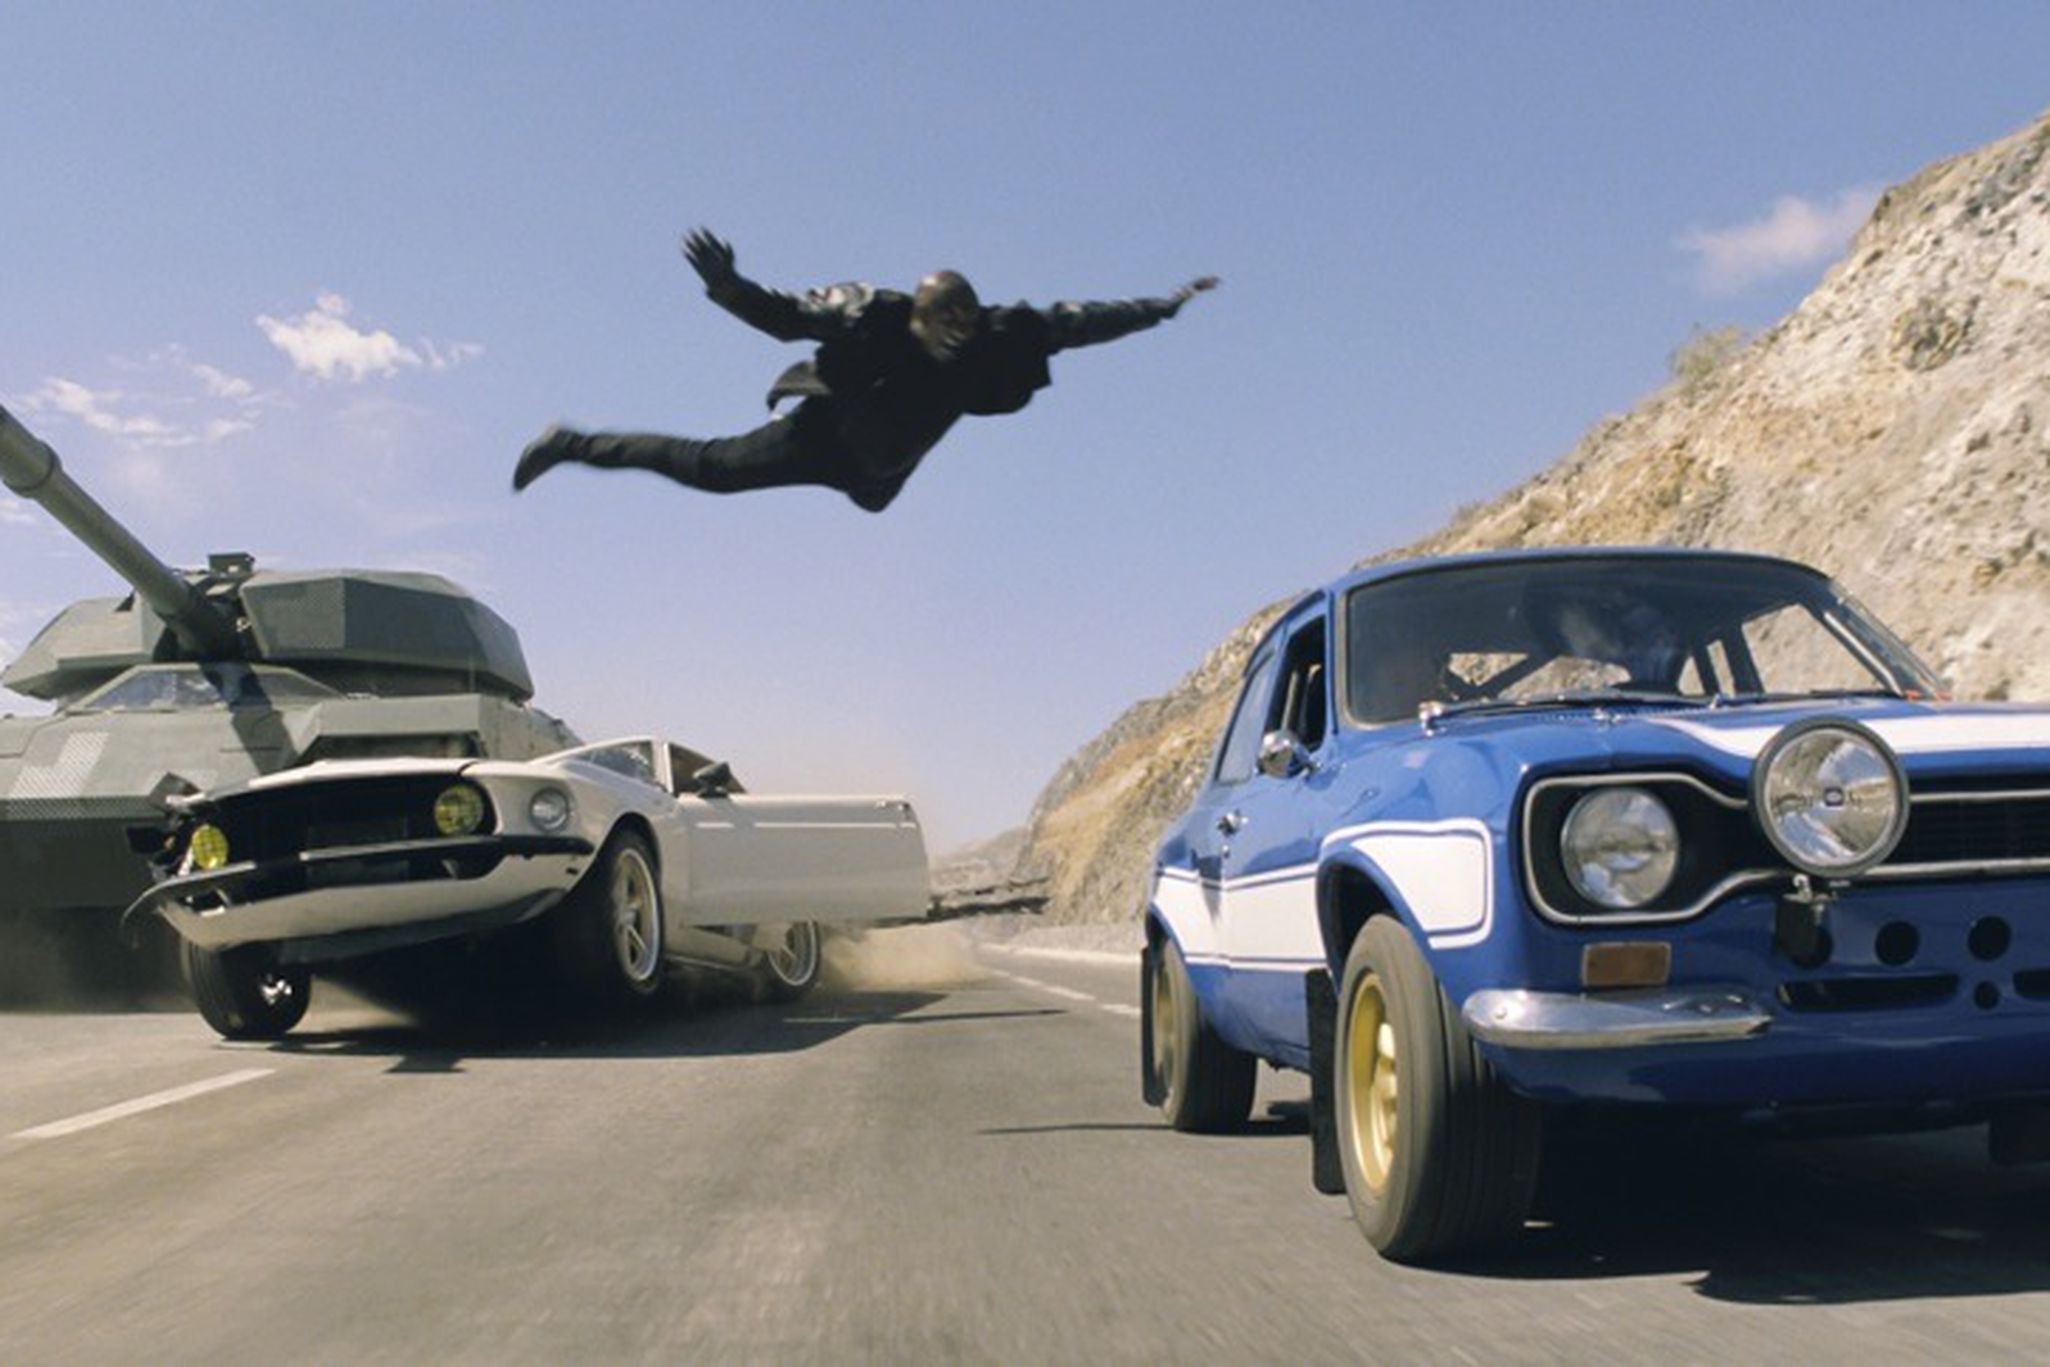 Fast & Furious 6' review: all roads lead to explosions | The Verge